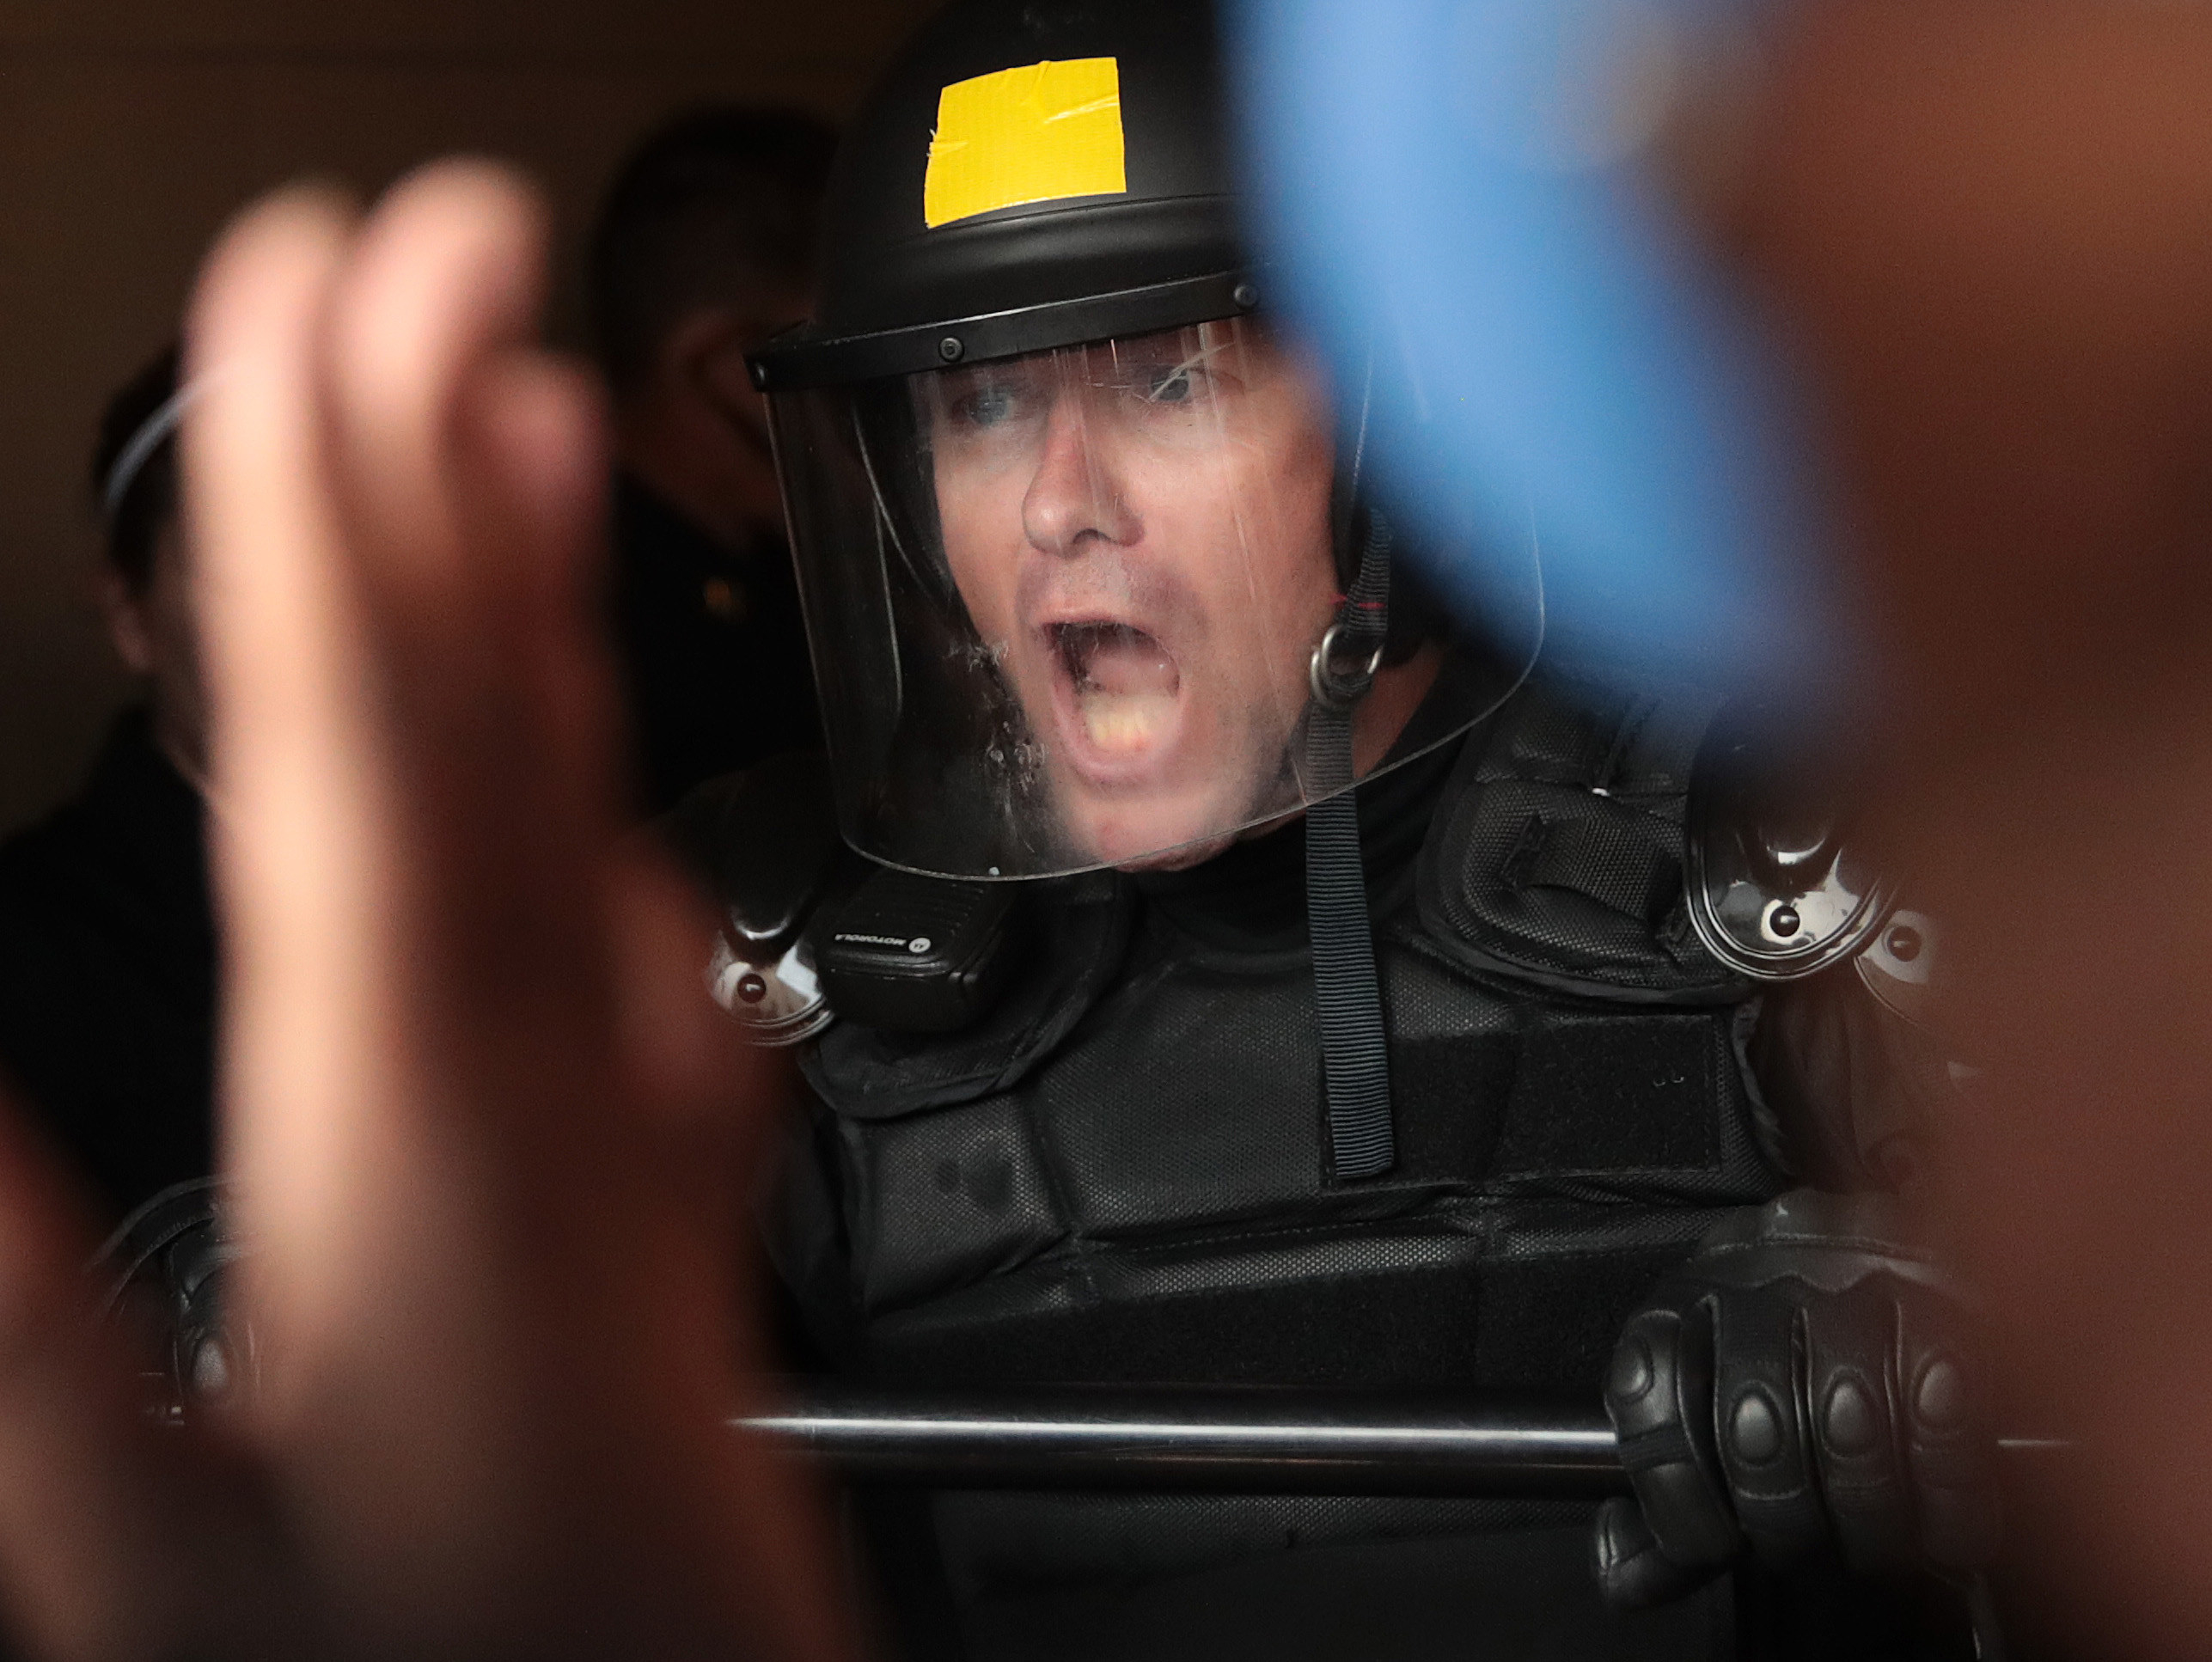 A white police officer in riot gear and a face shield yells